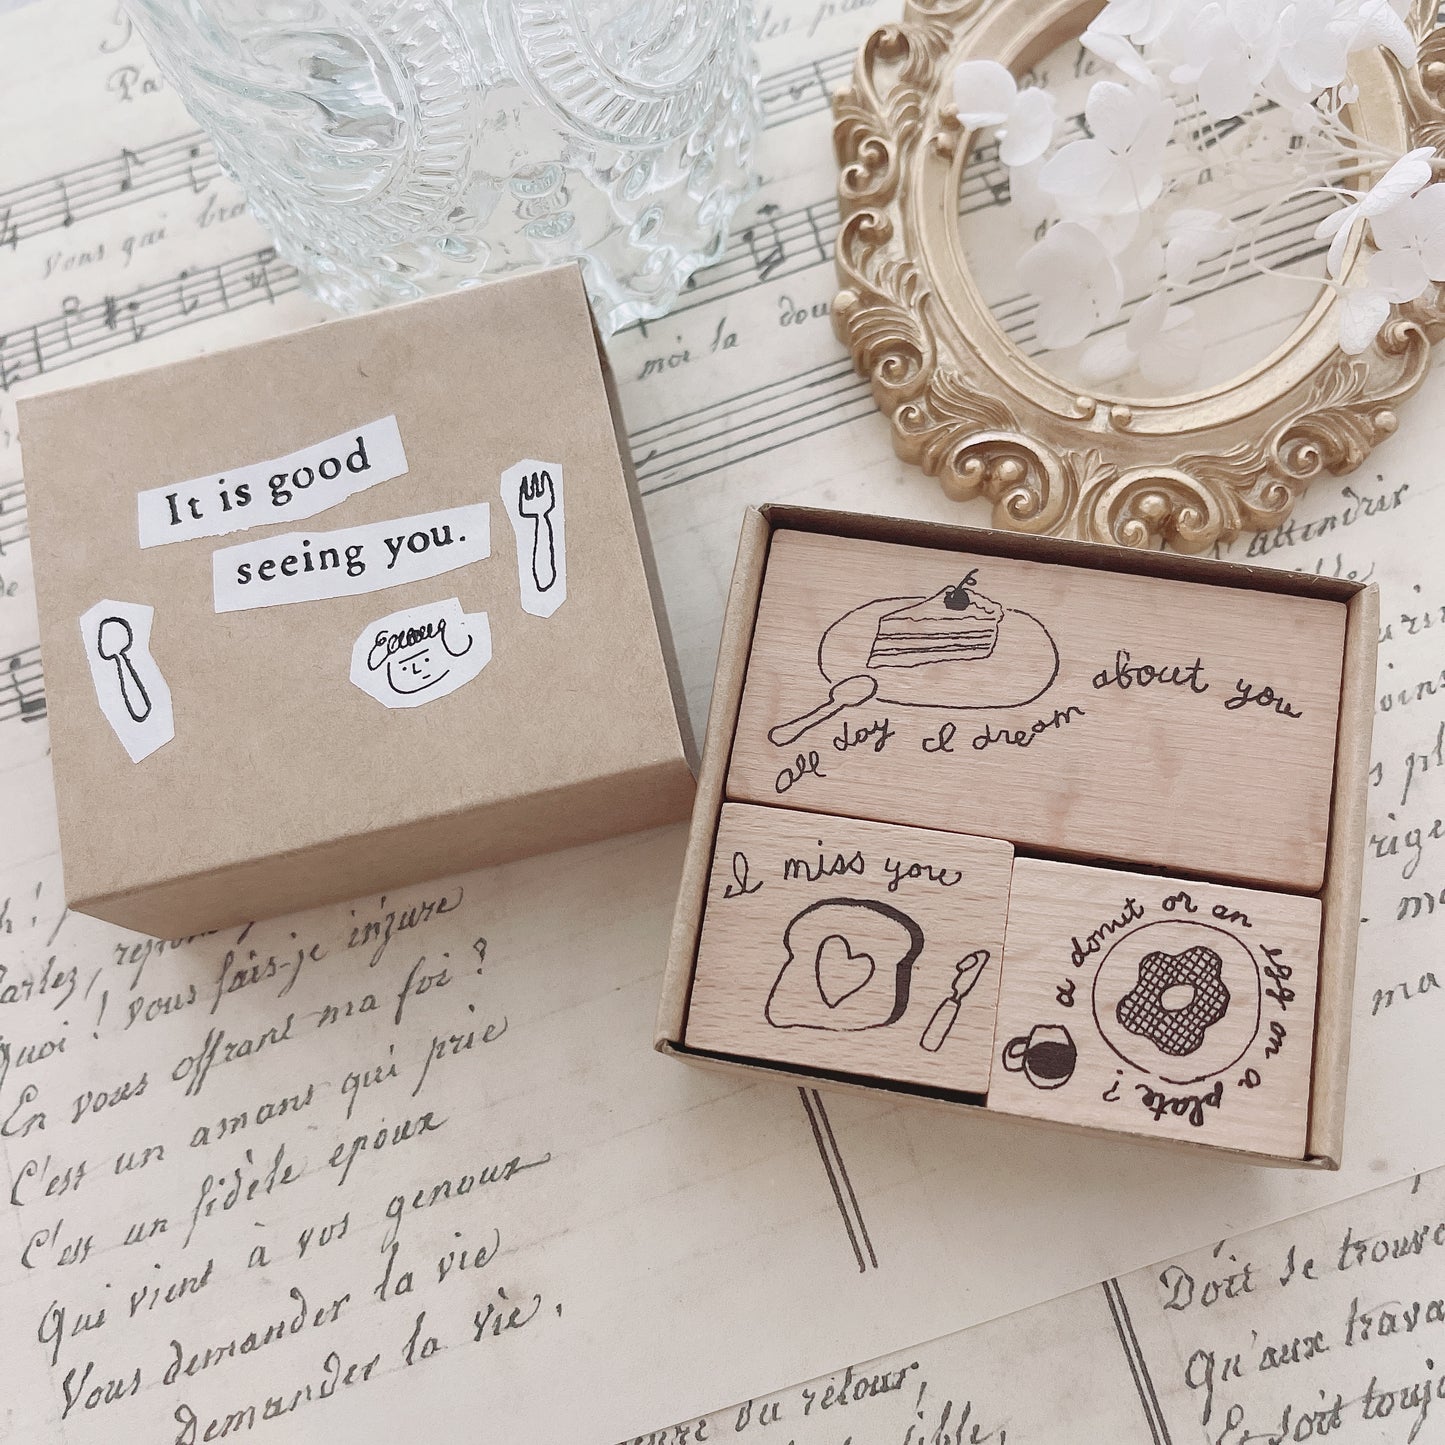 Yeoncharm It's Good To See You Rubber Stamp Set